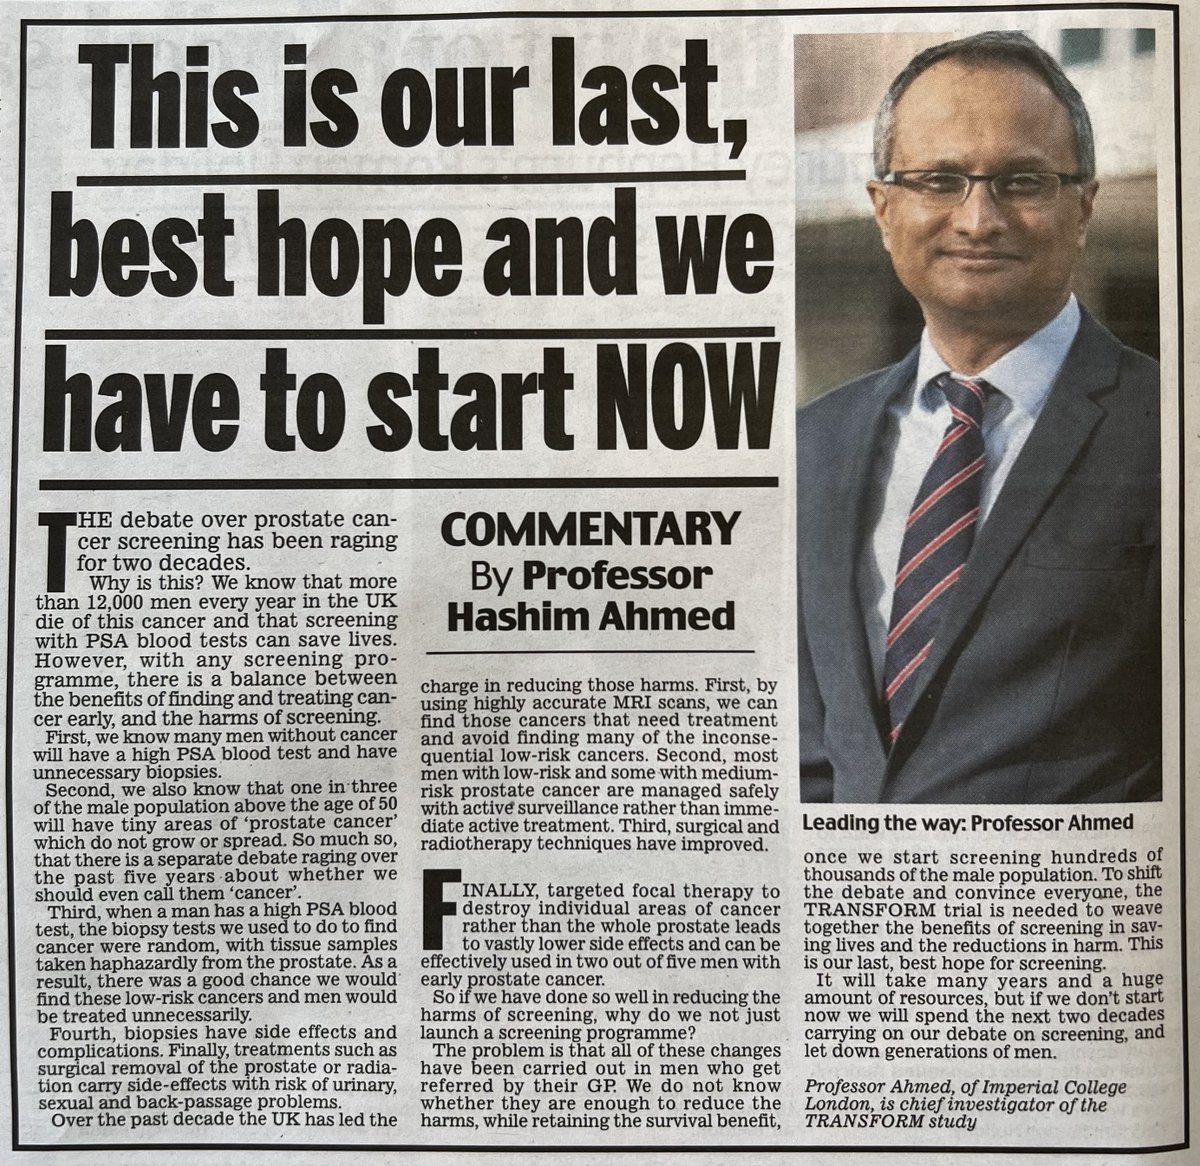 🗞️👀 In case you missed it! @DailyMailUK 💬 It will take many years and a huge amount of resources, but if we don't start now we will spend the next two decades carrying on our debate on screening, and let down generations of men. @LondonProstate1